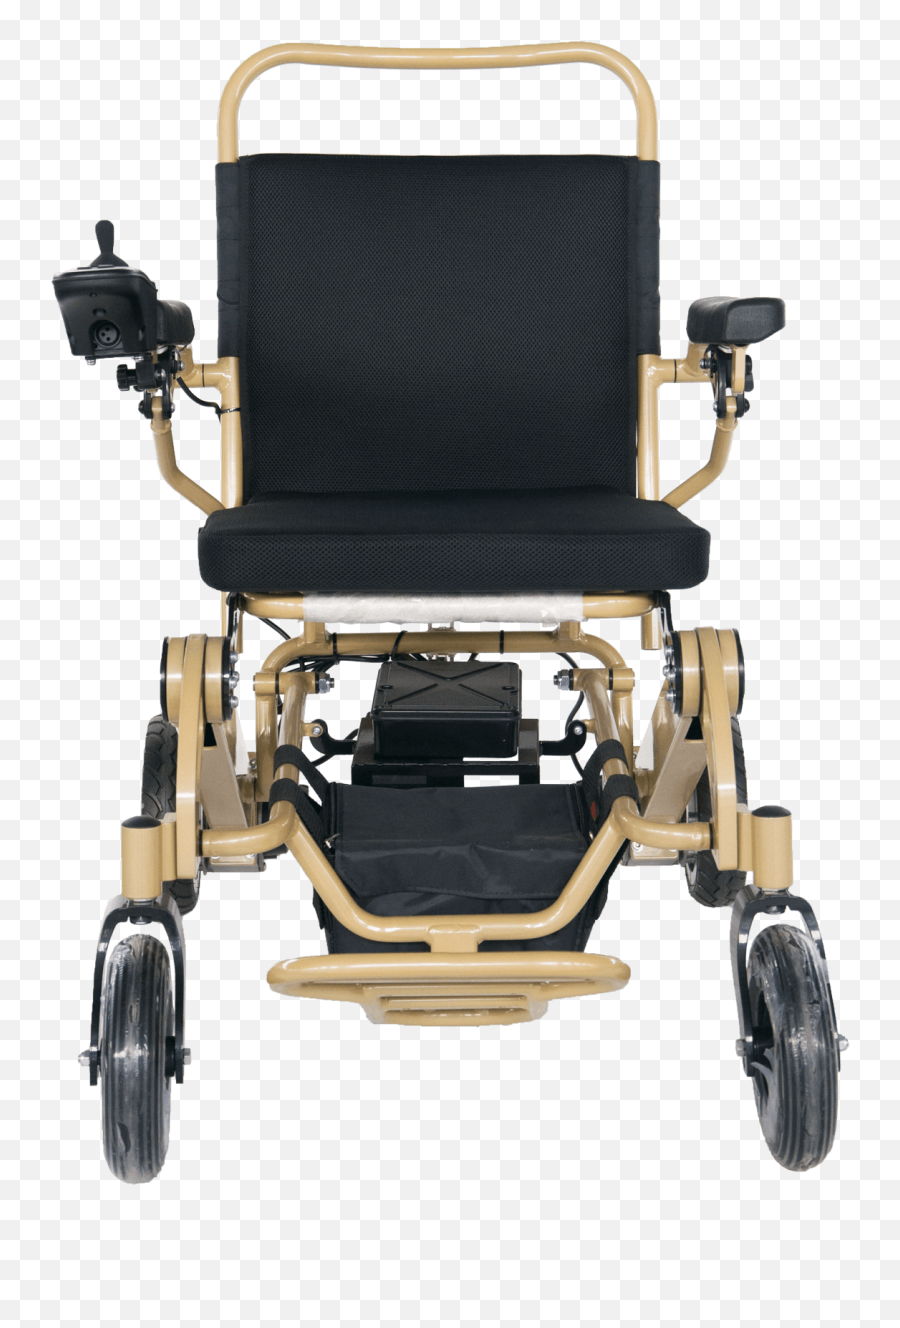 Common Types Of Wheelchairs - Solid Emoji,Emotion Wheelchair Disessemble